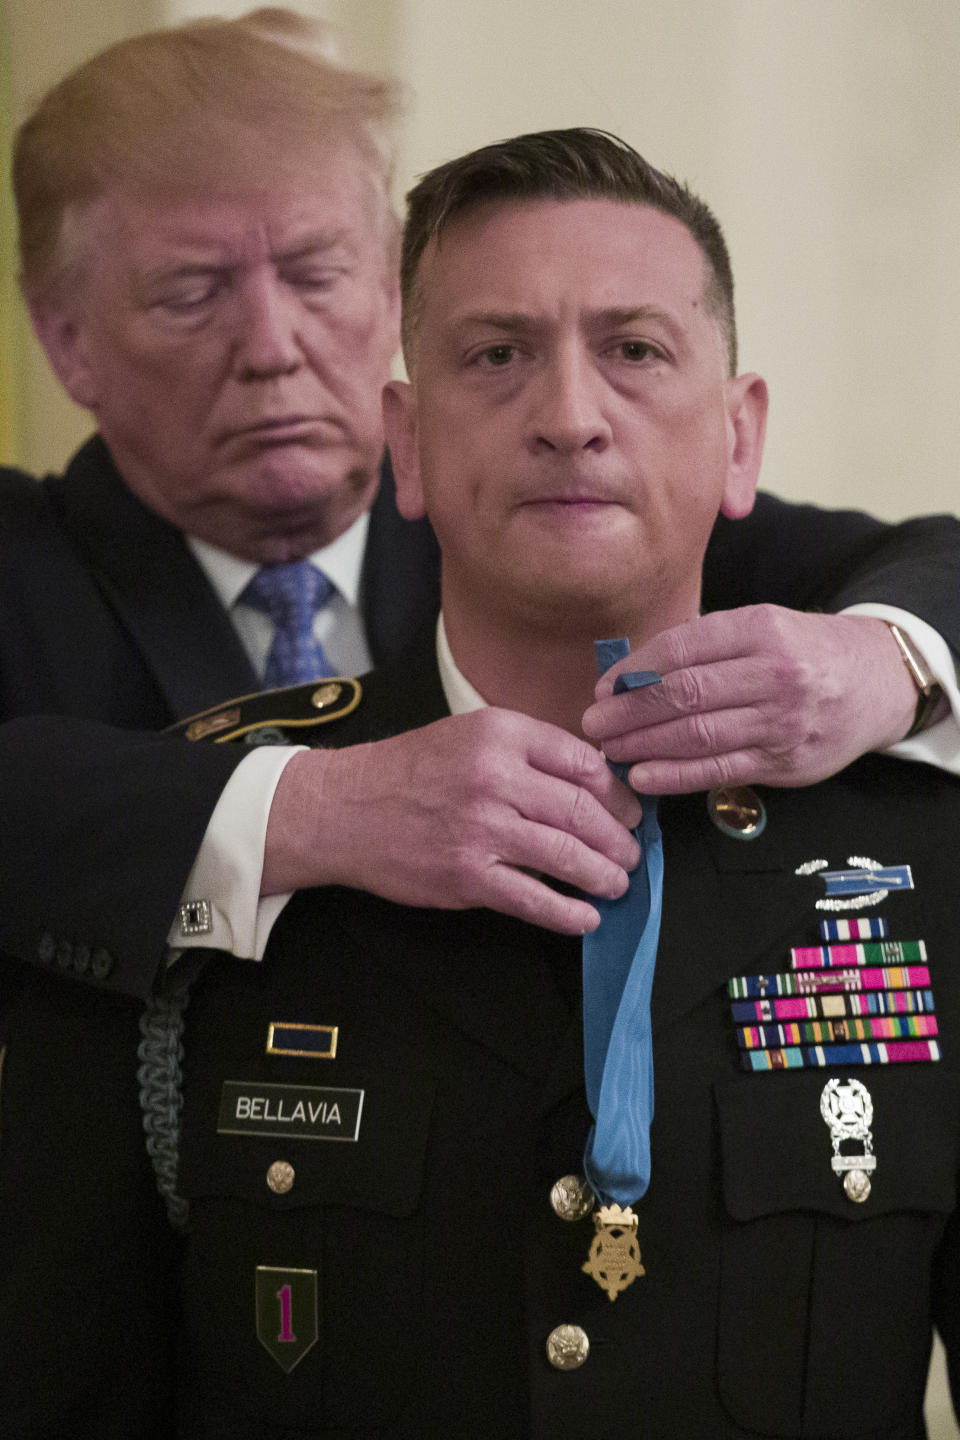 President Donald Trump awards the Medal of Honor to Army Staff Sgt. David Bellavia in the East Room of the White House in Washington, Tuesday, June 25, 2019, for conspicuous gallantry while serving in support of Operation Phantom Fury in Fallujah, Iraq. (AP Photo/Alex Brandon)